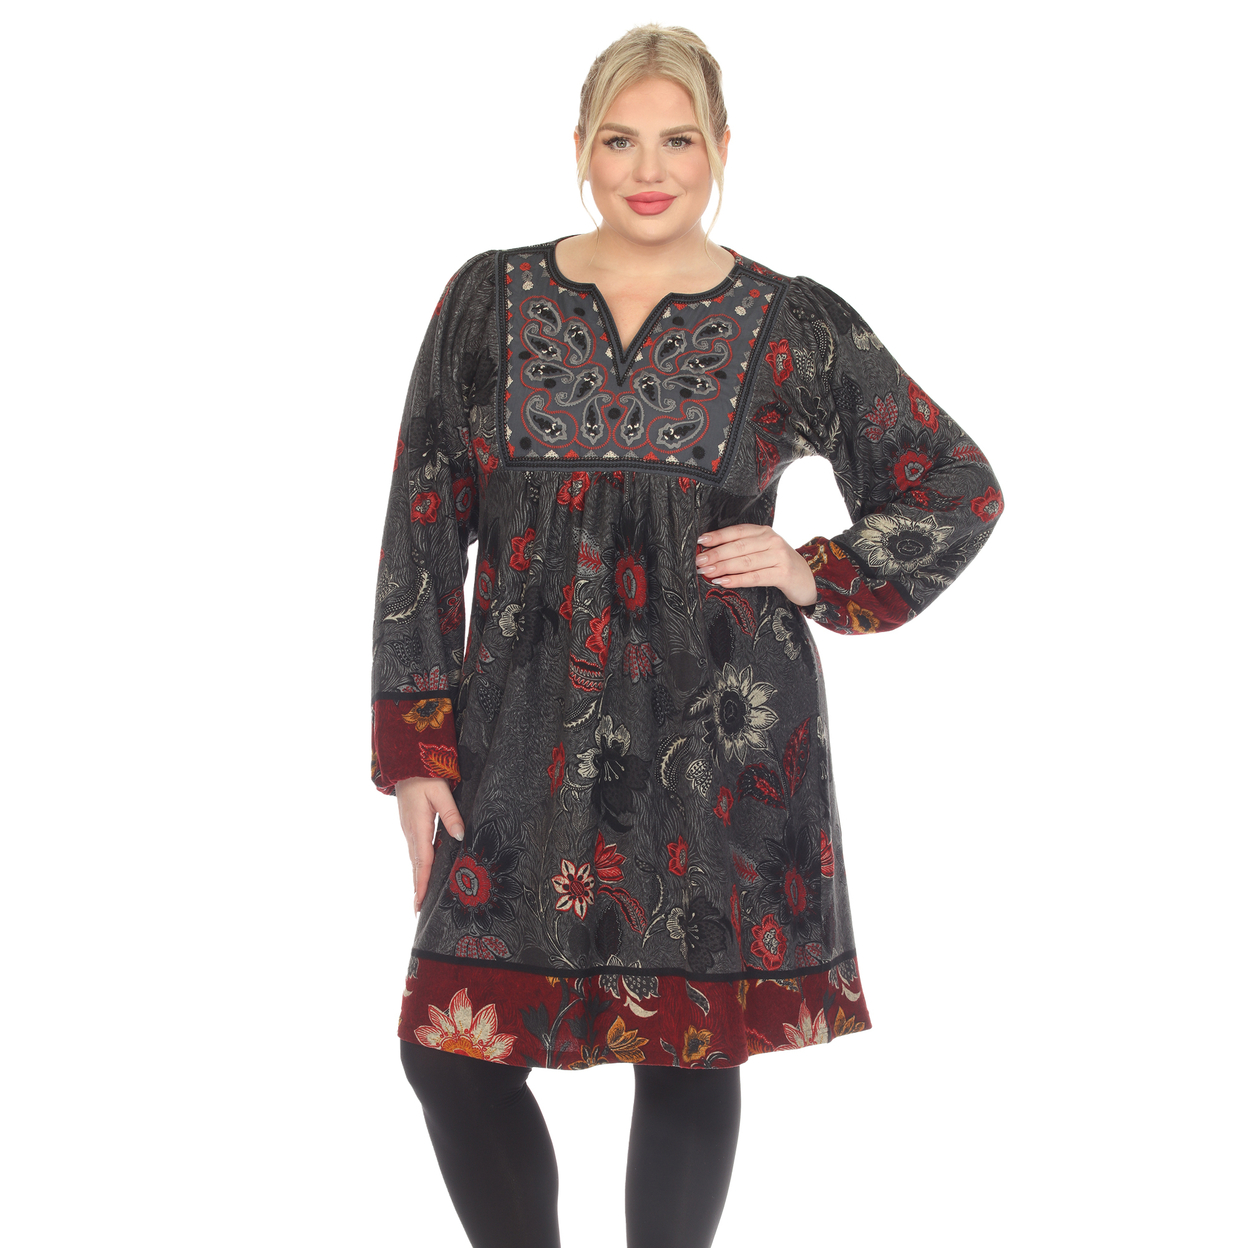 White Mark Women's Floral Paisley Sweater Dress - Grey/red, 3x